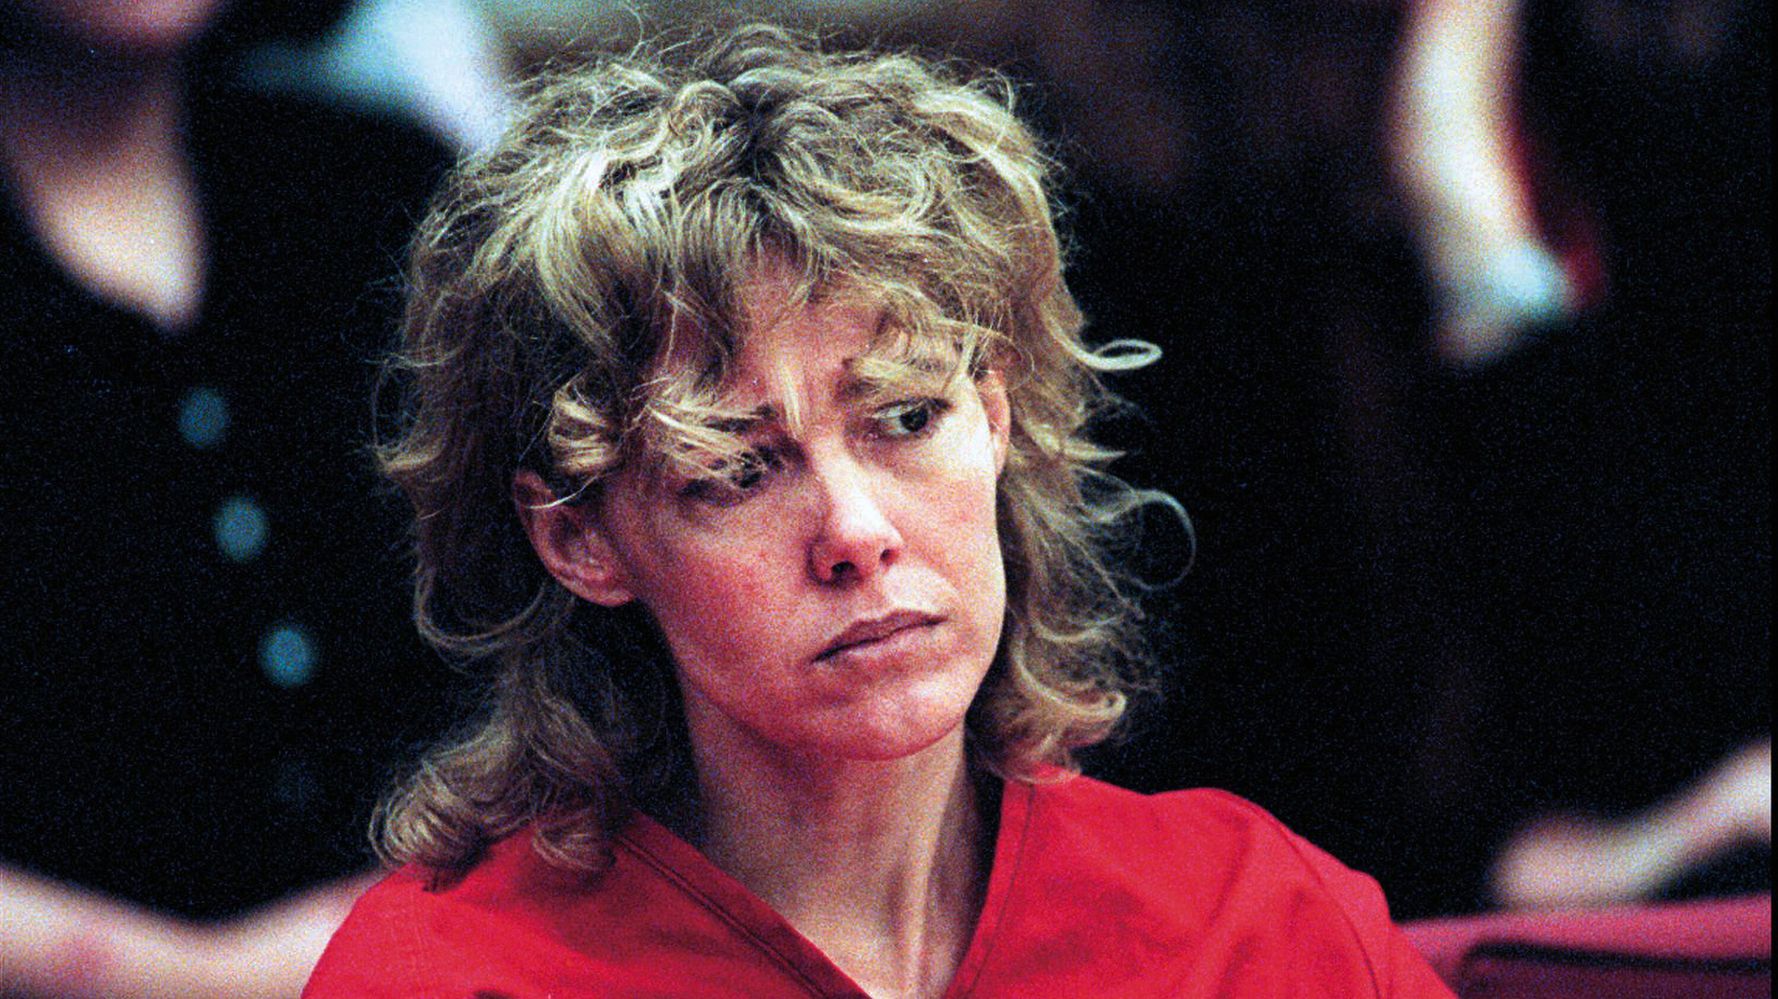 Mary Kay Letourneau, Former 6th Grade Teacher Jailed For Raping Student, Dead At 58